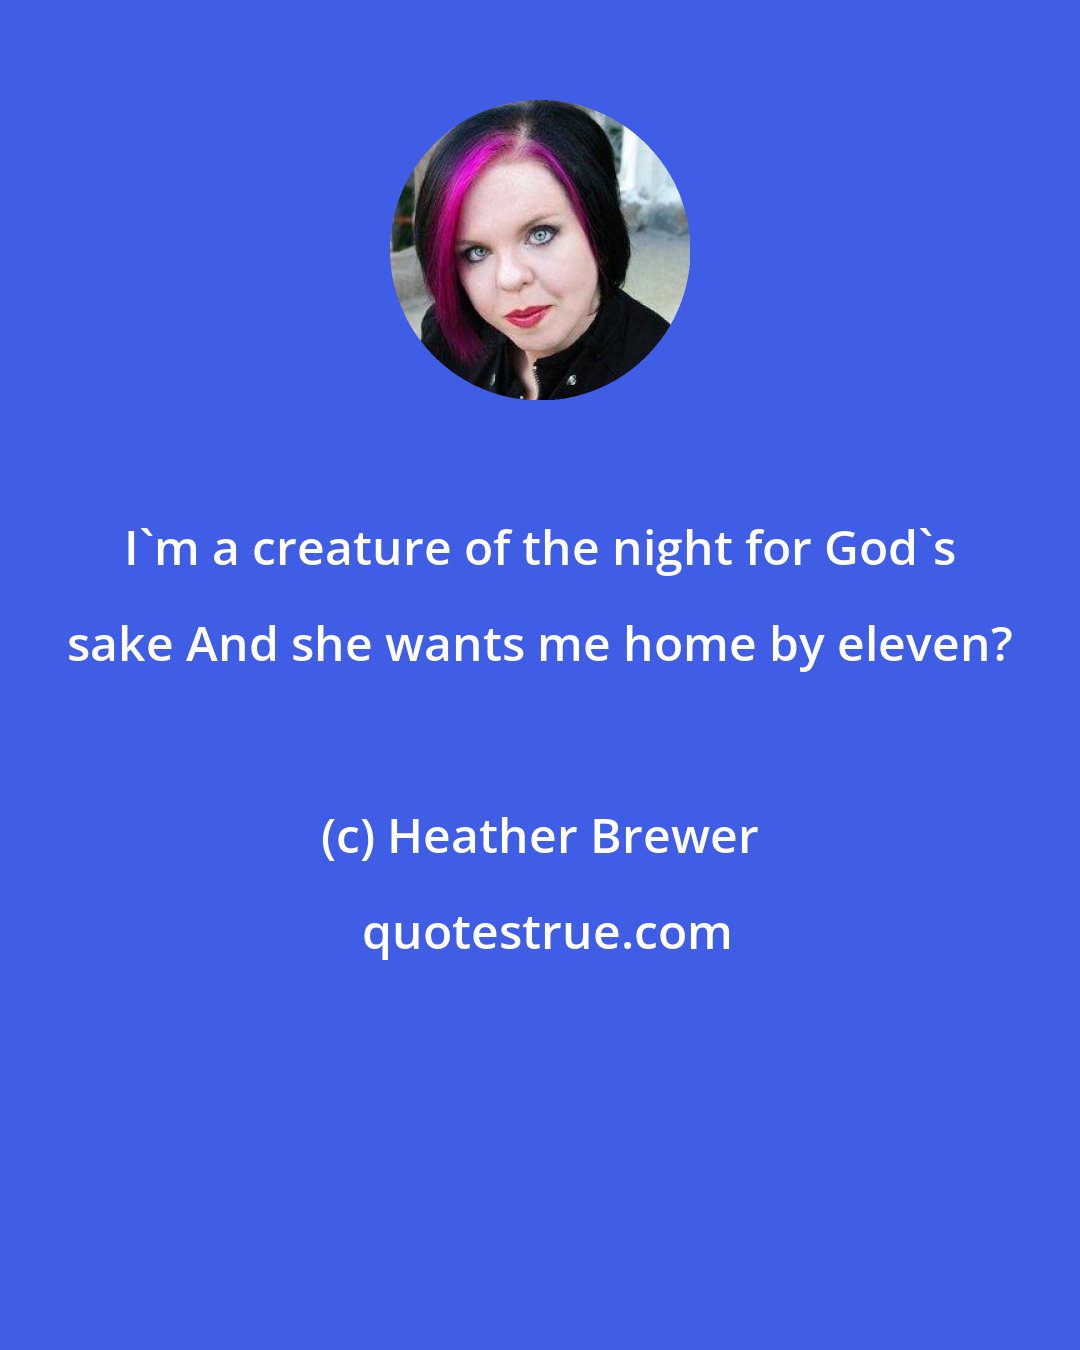 Heather Brewer: I'm a creature of the night for God's sake And she wants me home by eleven?